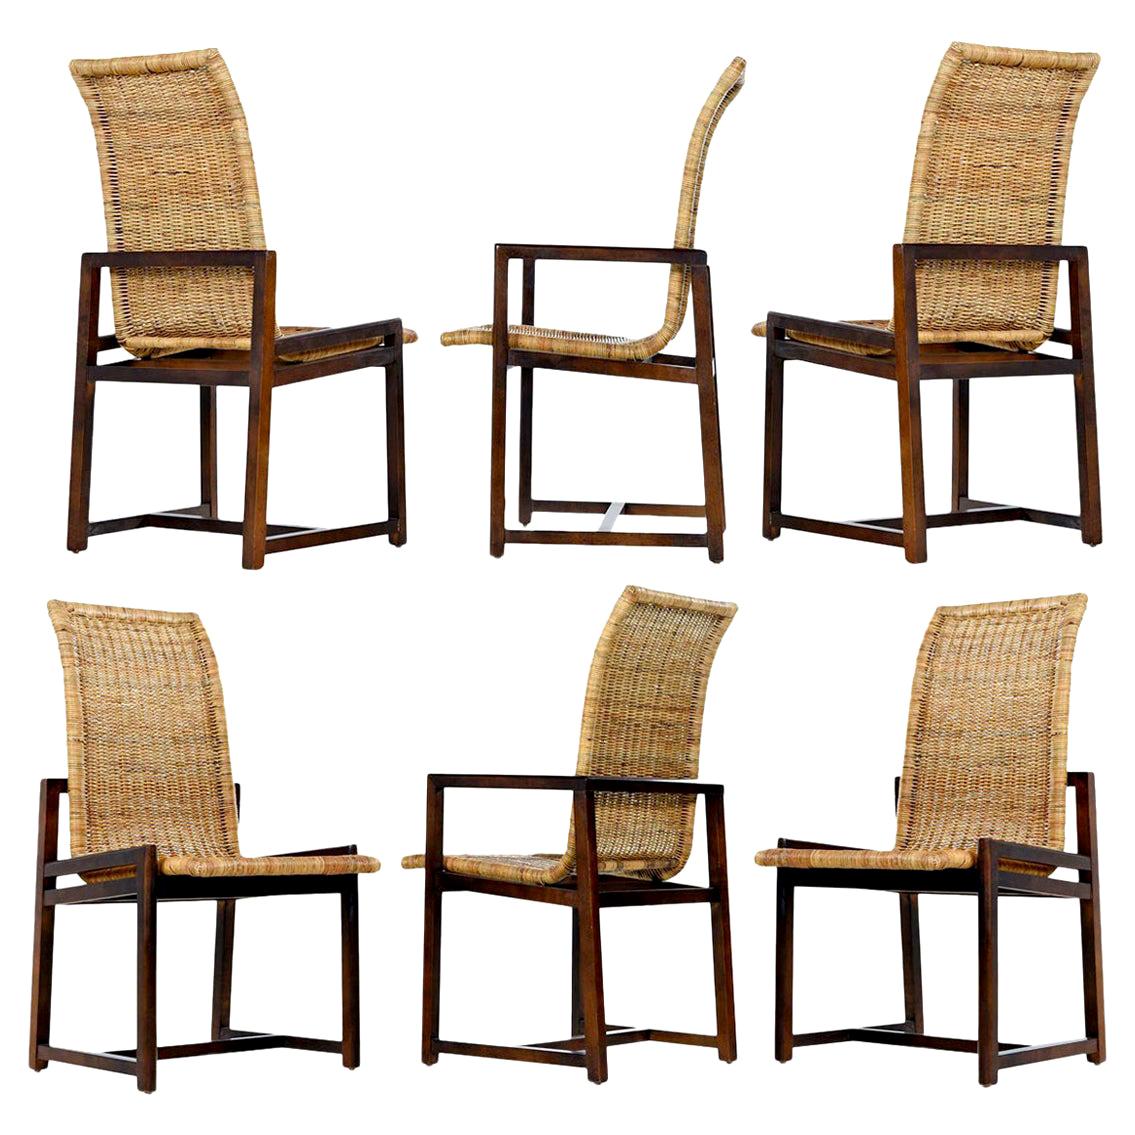 High Back Woven Rattan Dining Chairs by Century Furniture